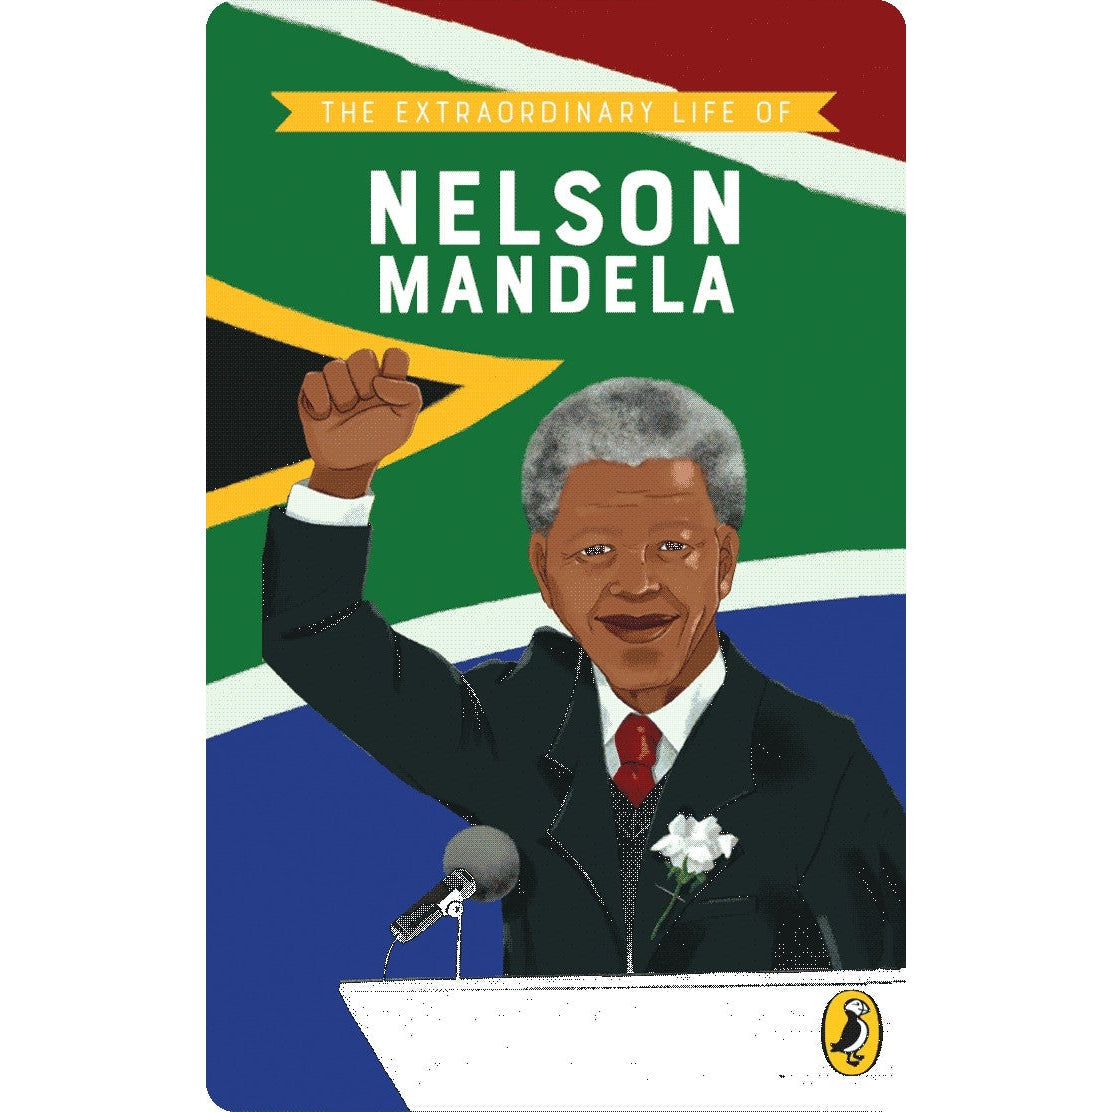 Yoto Card - The Extraordinary Life of Nelson Mandela - Child Friendly Audio Story Card for the Yoto Player